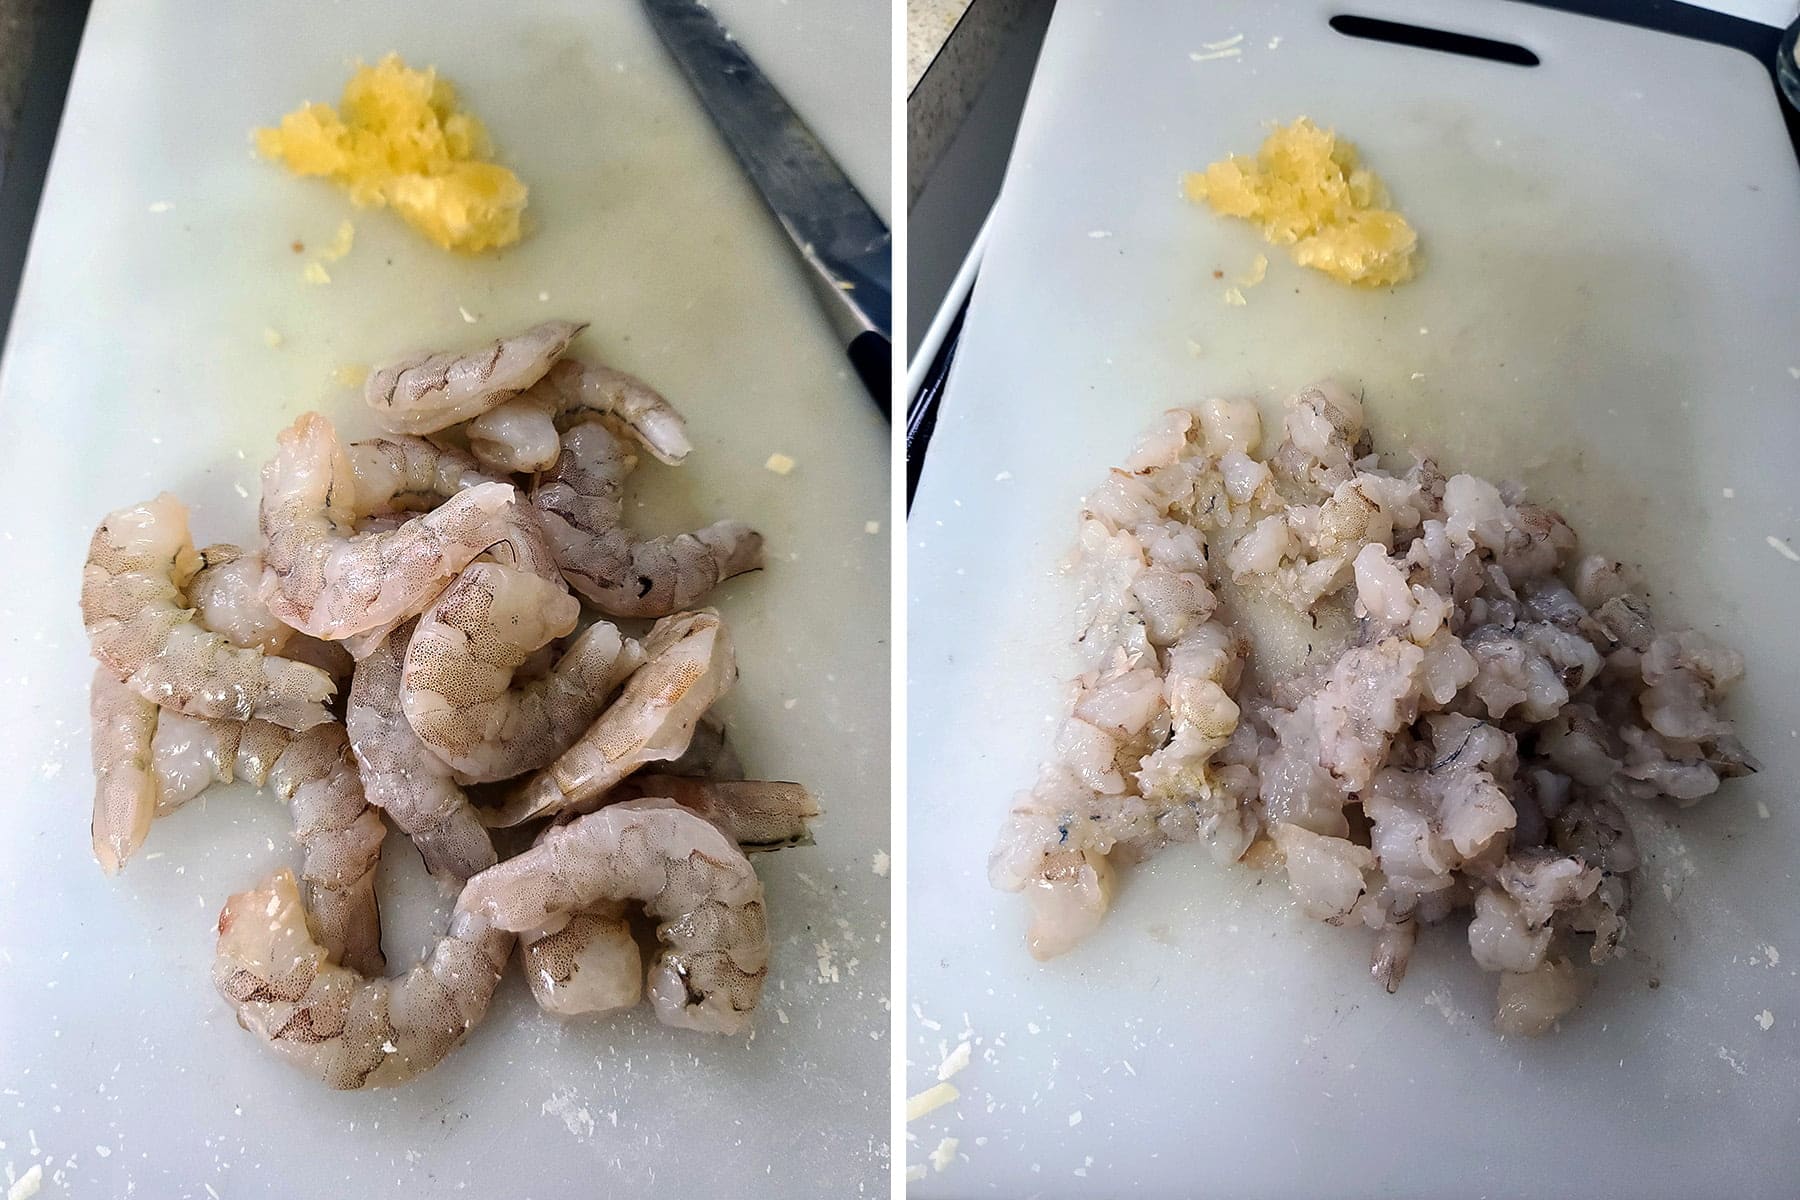 A two part compilation image showing whole raw shrimp and minced garlic on a cutting board, and the same cutting board with the shrimp chopped up on it.